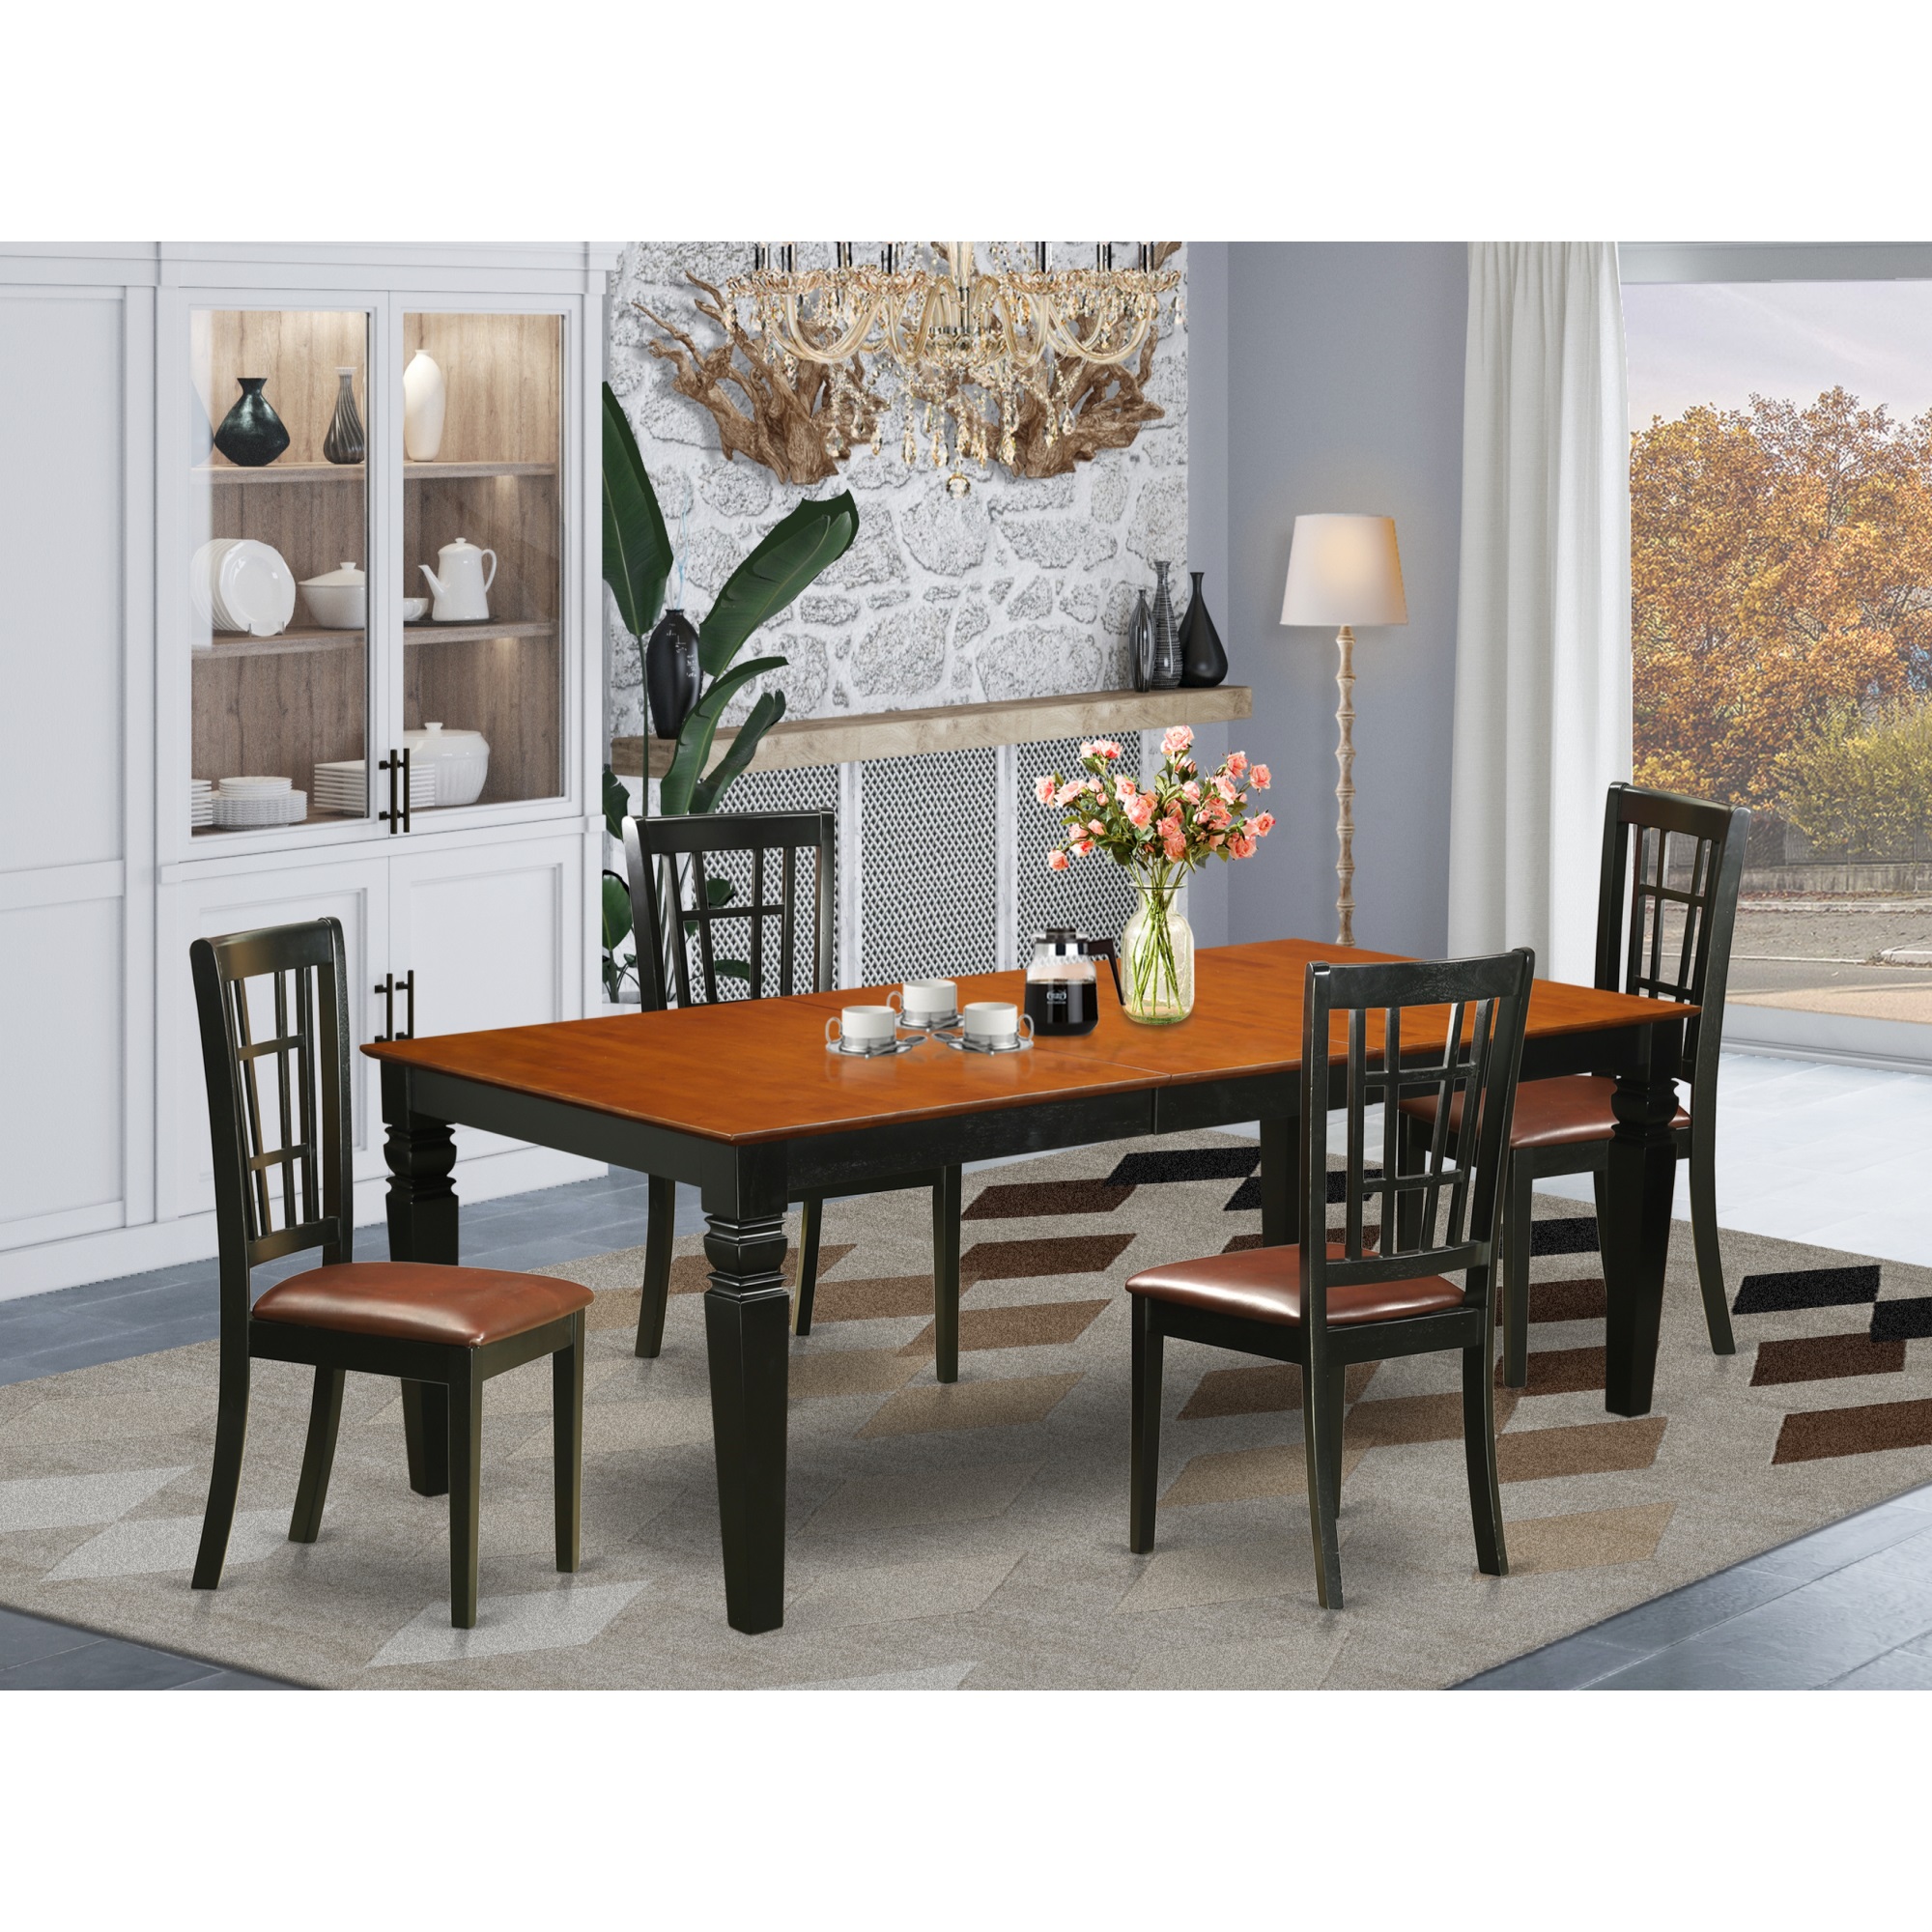 East West Furniture LGNI5-BCH-LC 5 Pc Dining room set with a Dining Table and 4 Dining Chairs in Black and Cherry